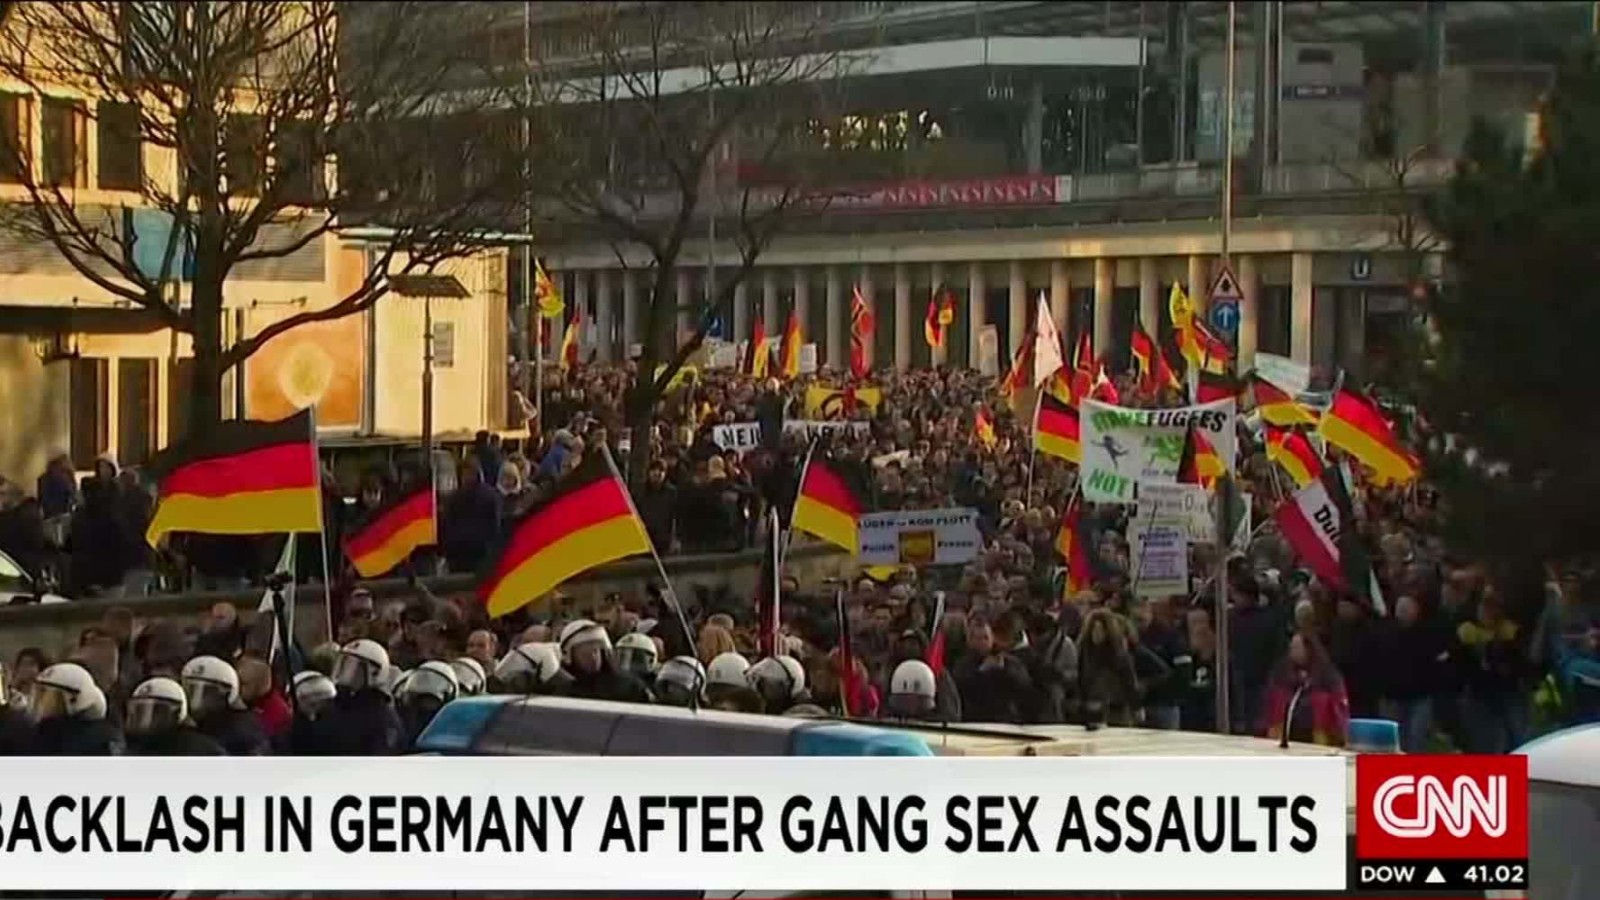 Backlash In Germany After Gang Sex Assaults Cnn Video 